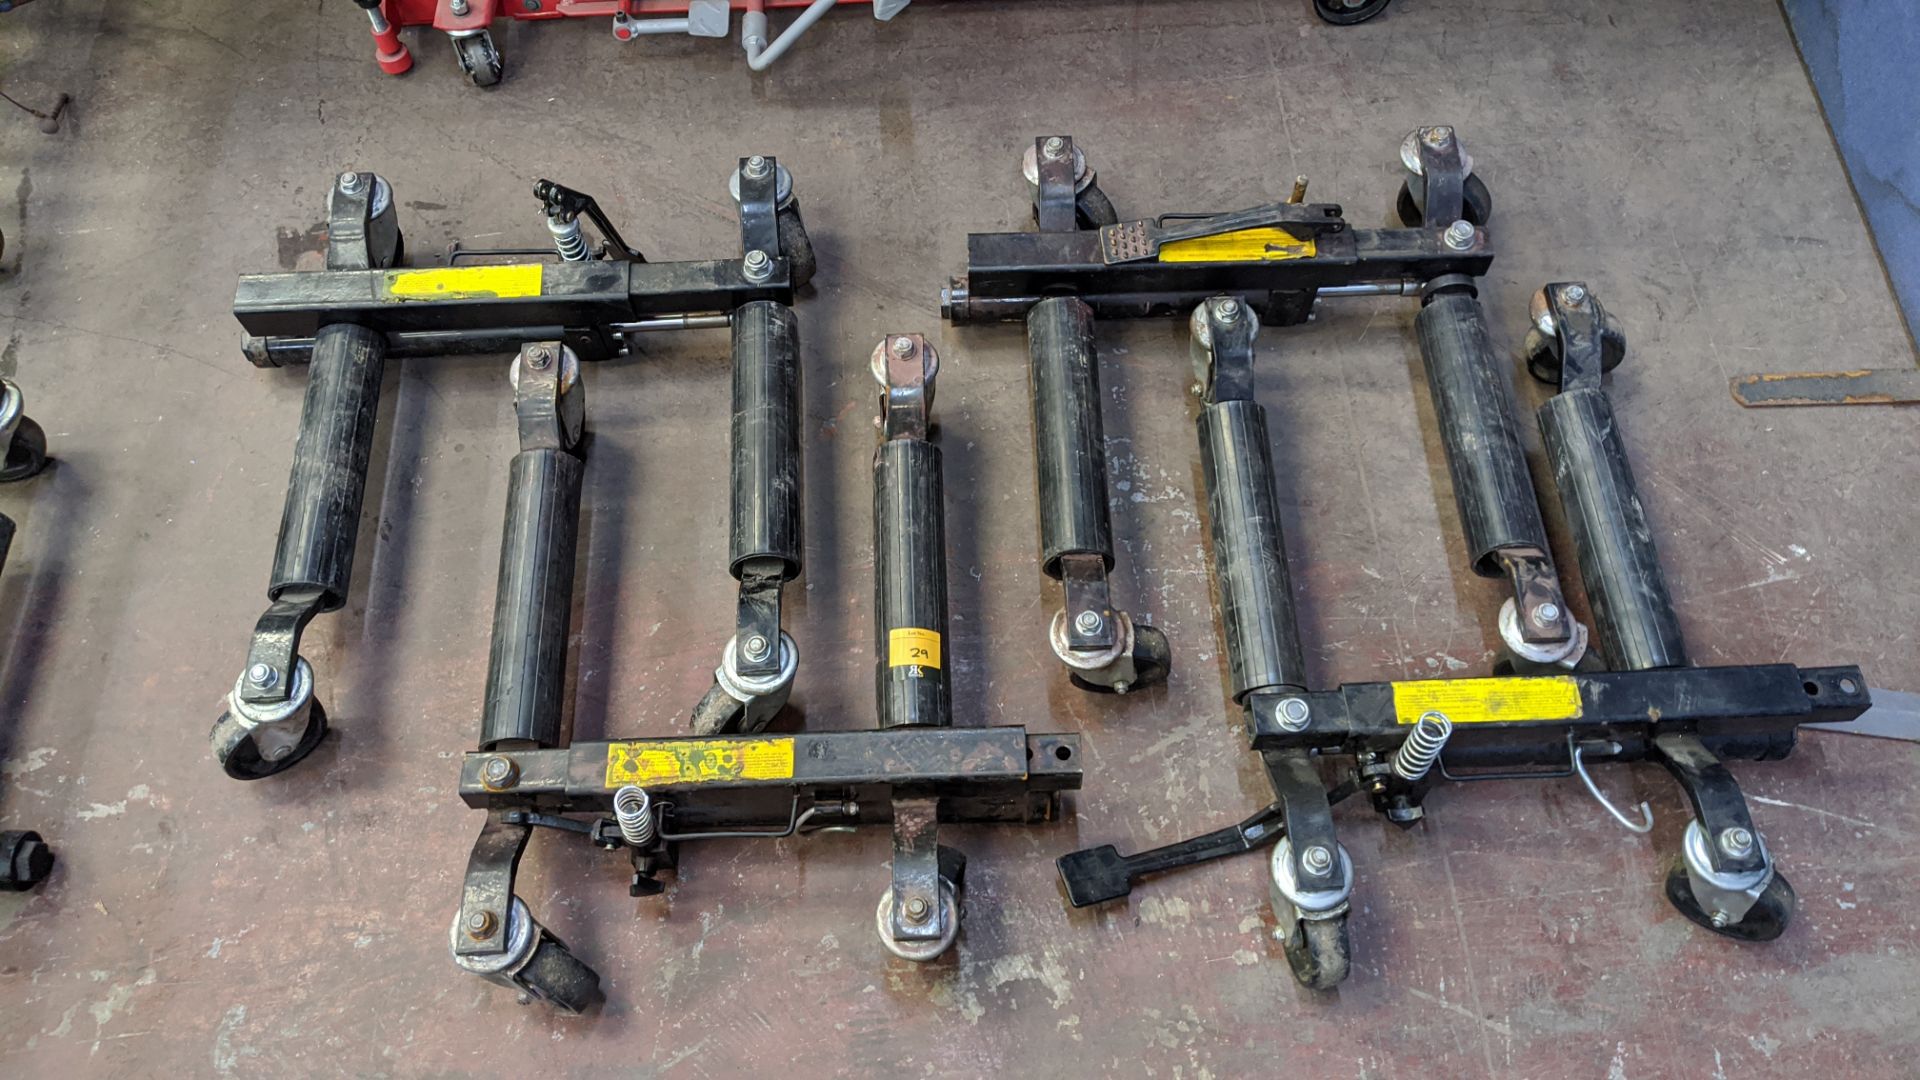 2 off sets of 4 hydraulic vehicle positioning jacks, max. capacity 1500lbs i.e. 8 jacks in total. - Image 3 of 7